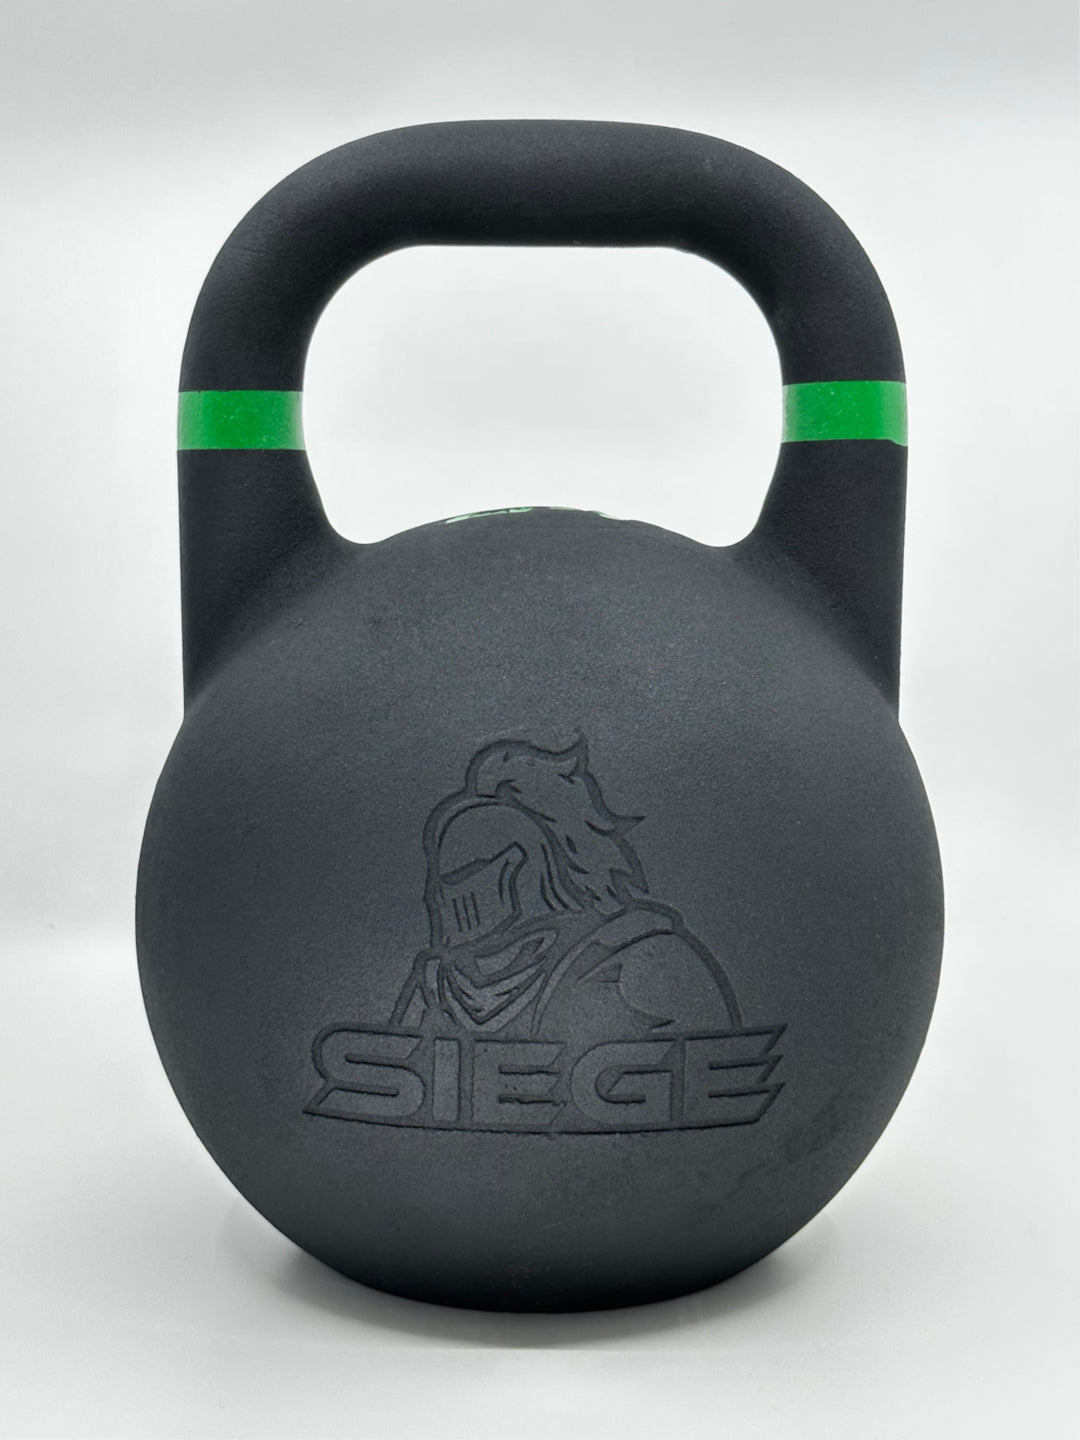 Competition Kettlebells – Siege